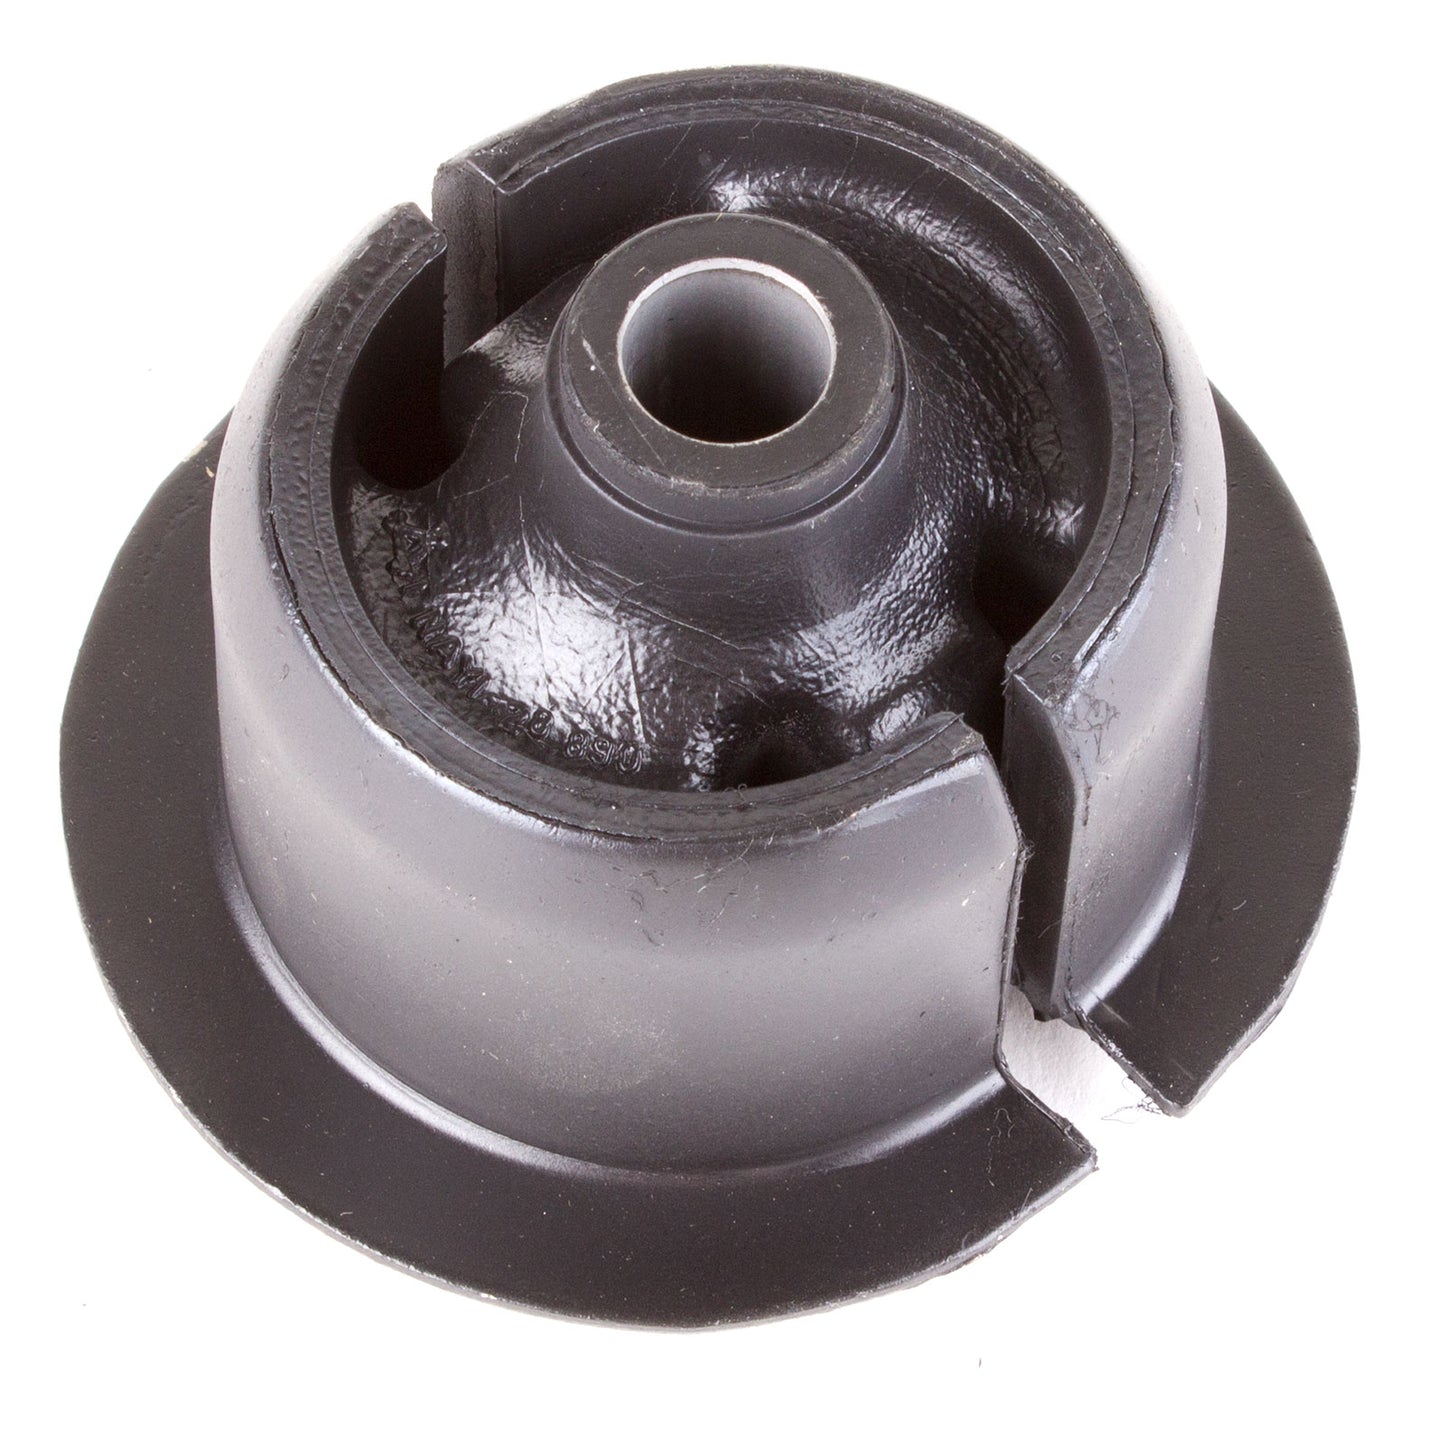 Mazda Competition differential bushing